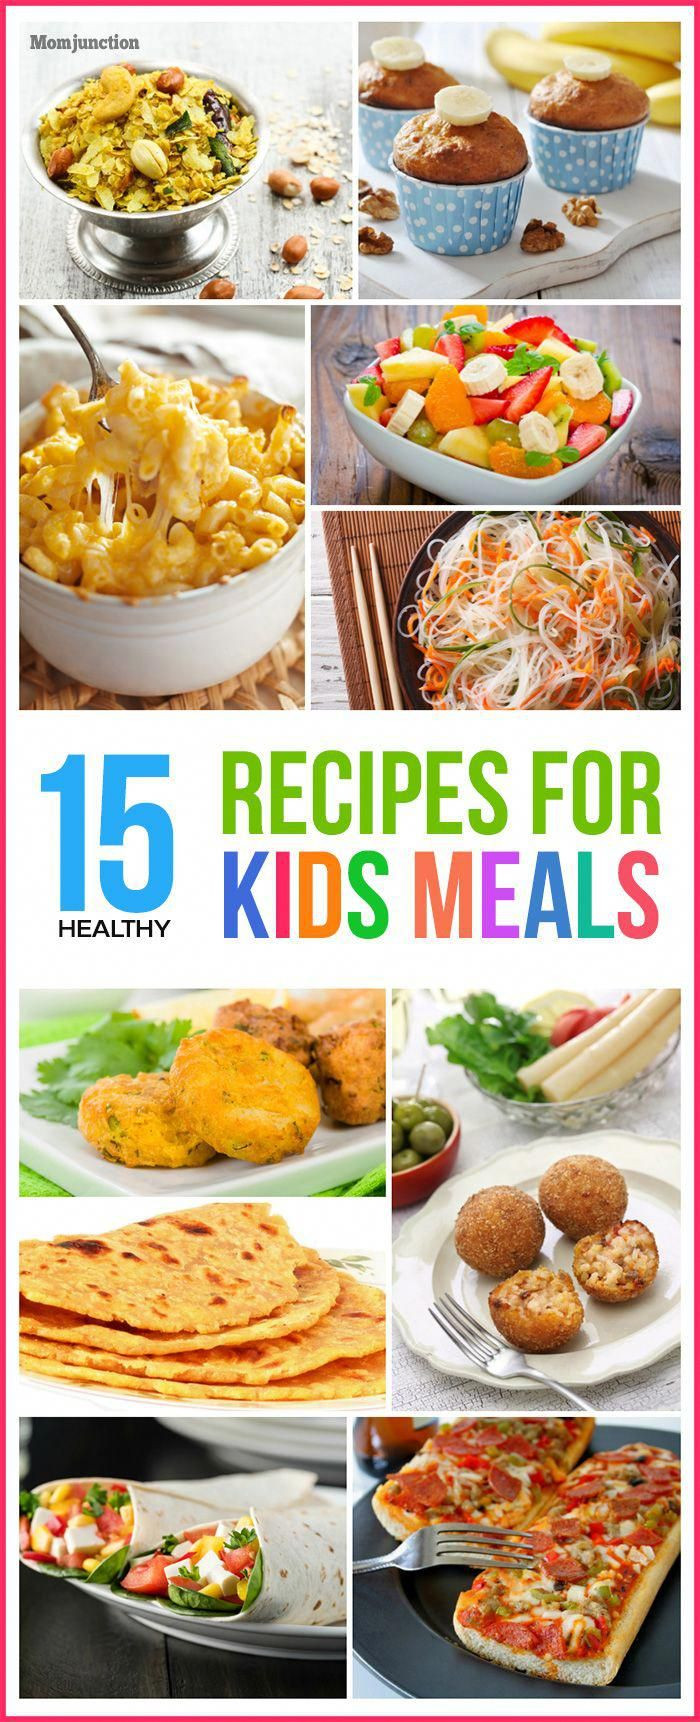 Kid Friendly Dinners For Picky Eaters
 Troubled with picky eaters at home Looking for healthy